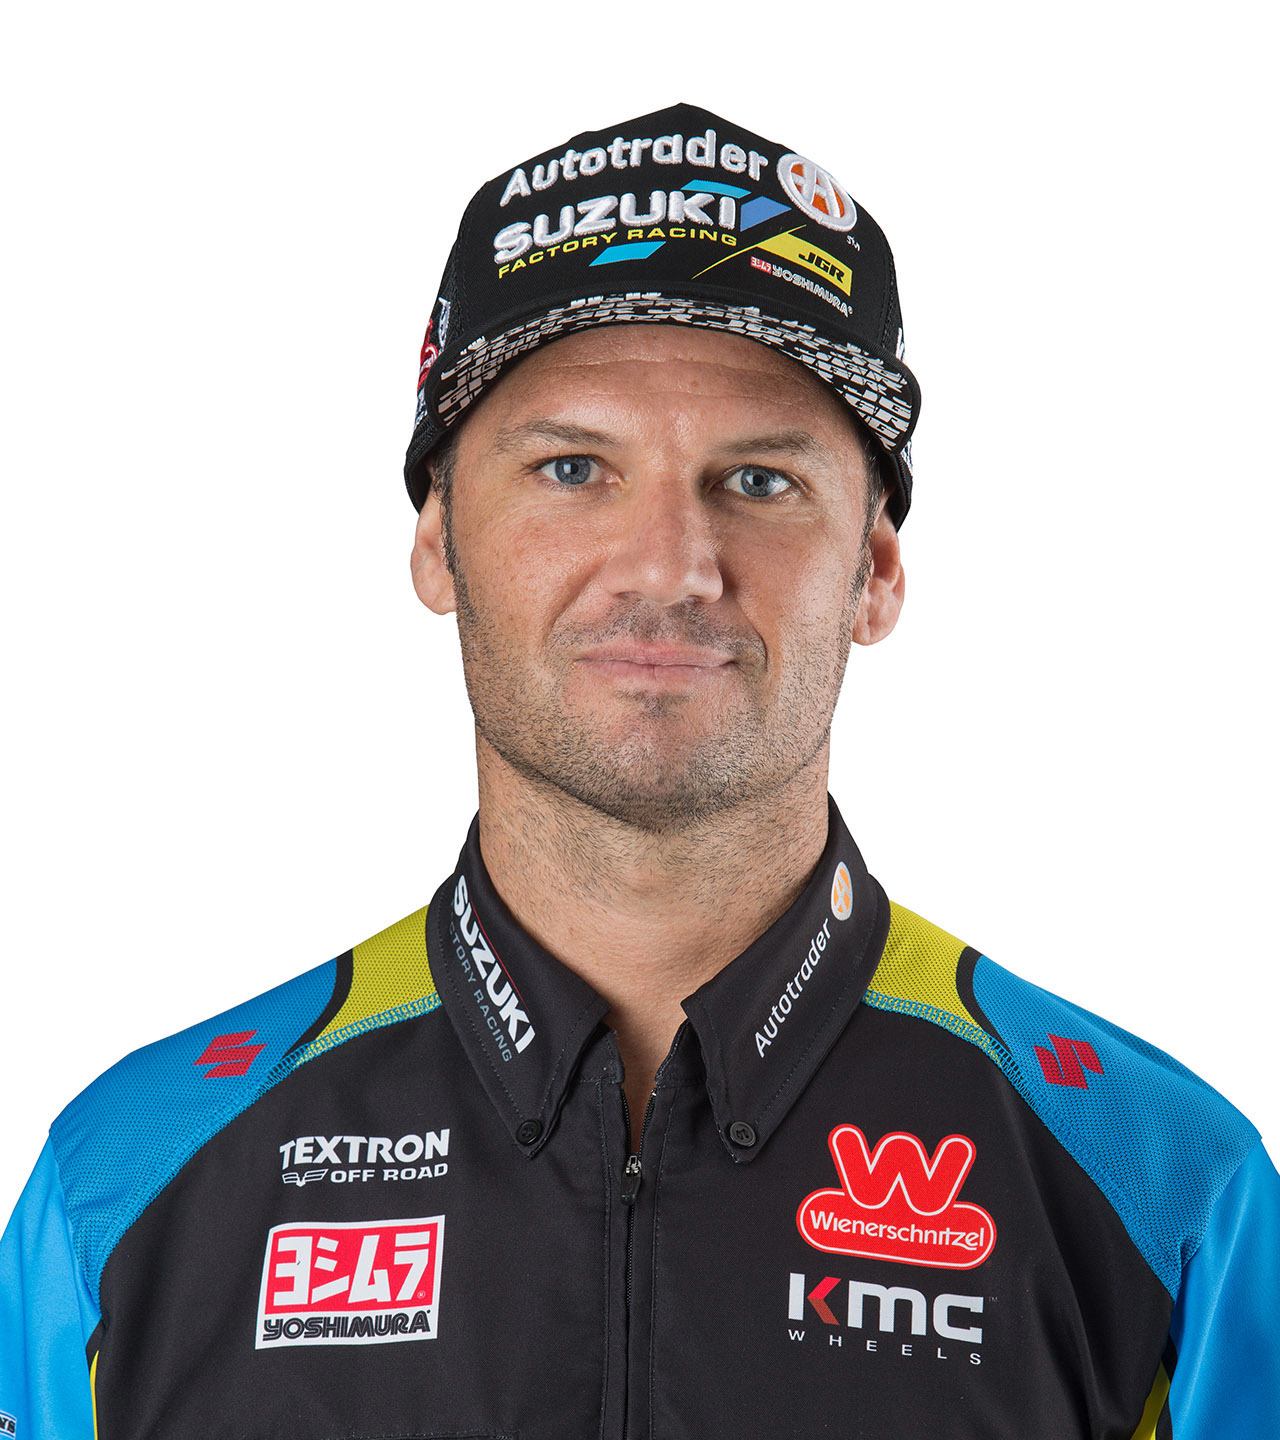 Autotrader-Yoshimura-Suzuki Factory Racing Team and Chad Reed set to race the Monster Energy Cup